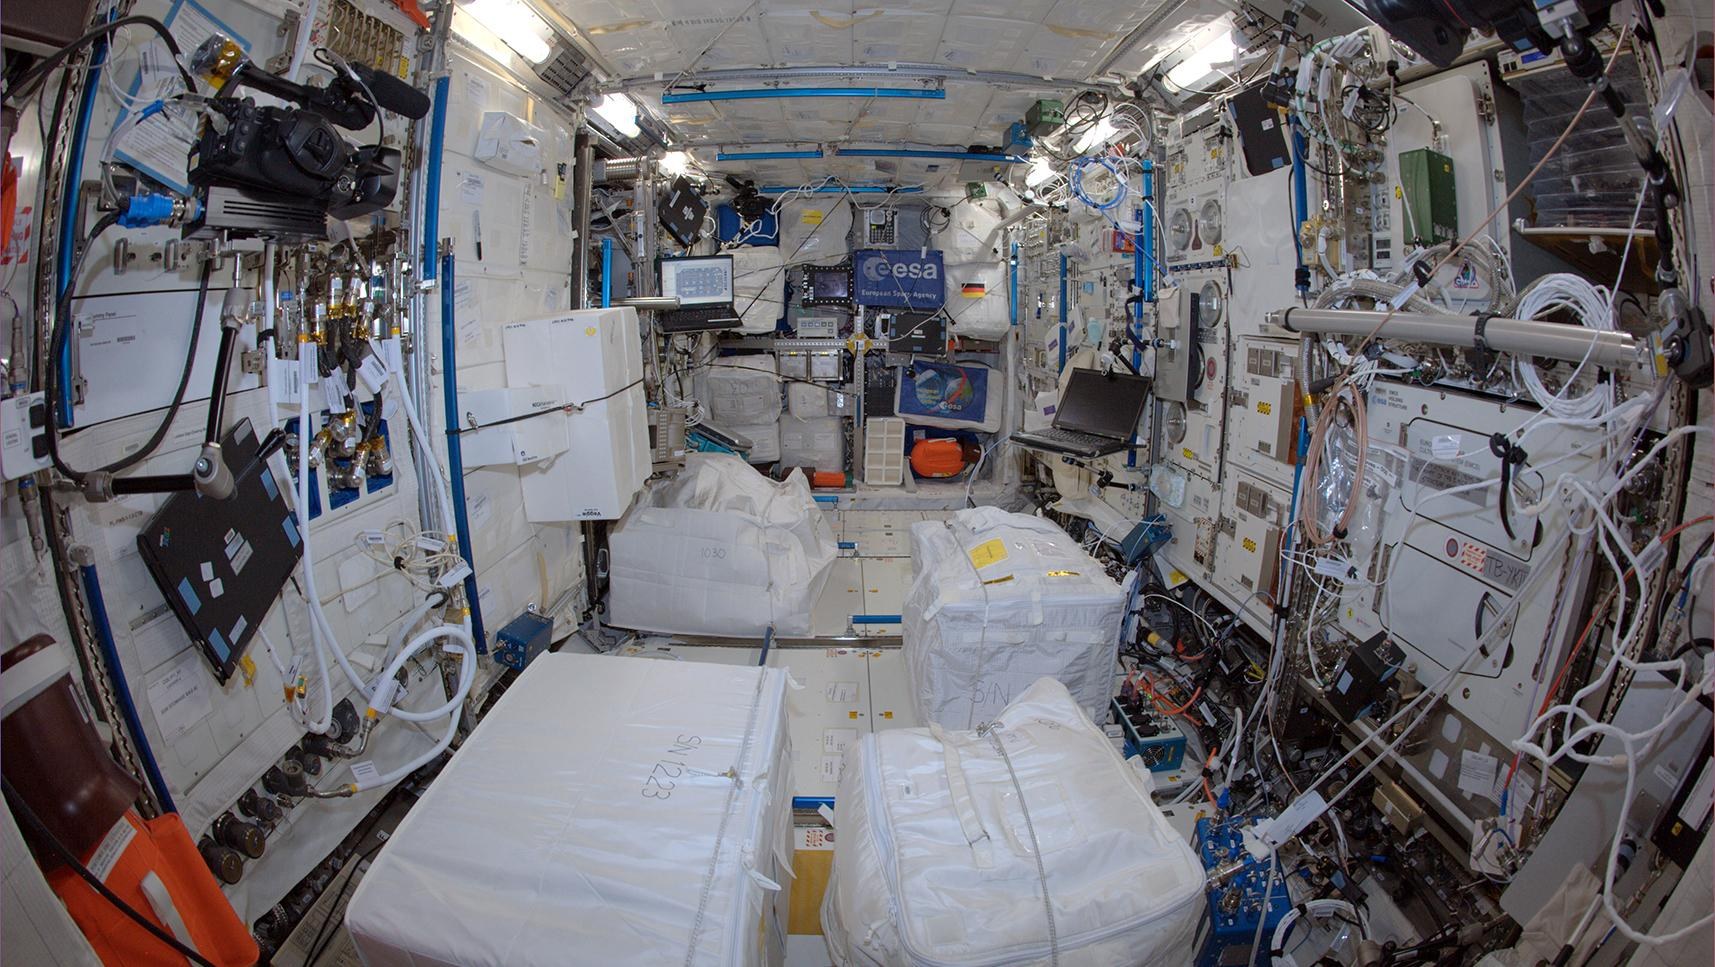 View of the Columbus laboratory of the ISS